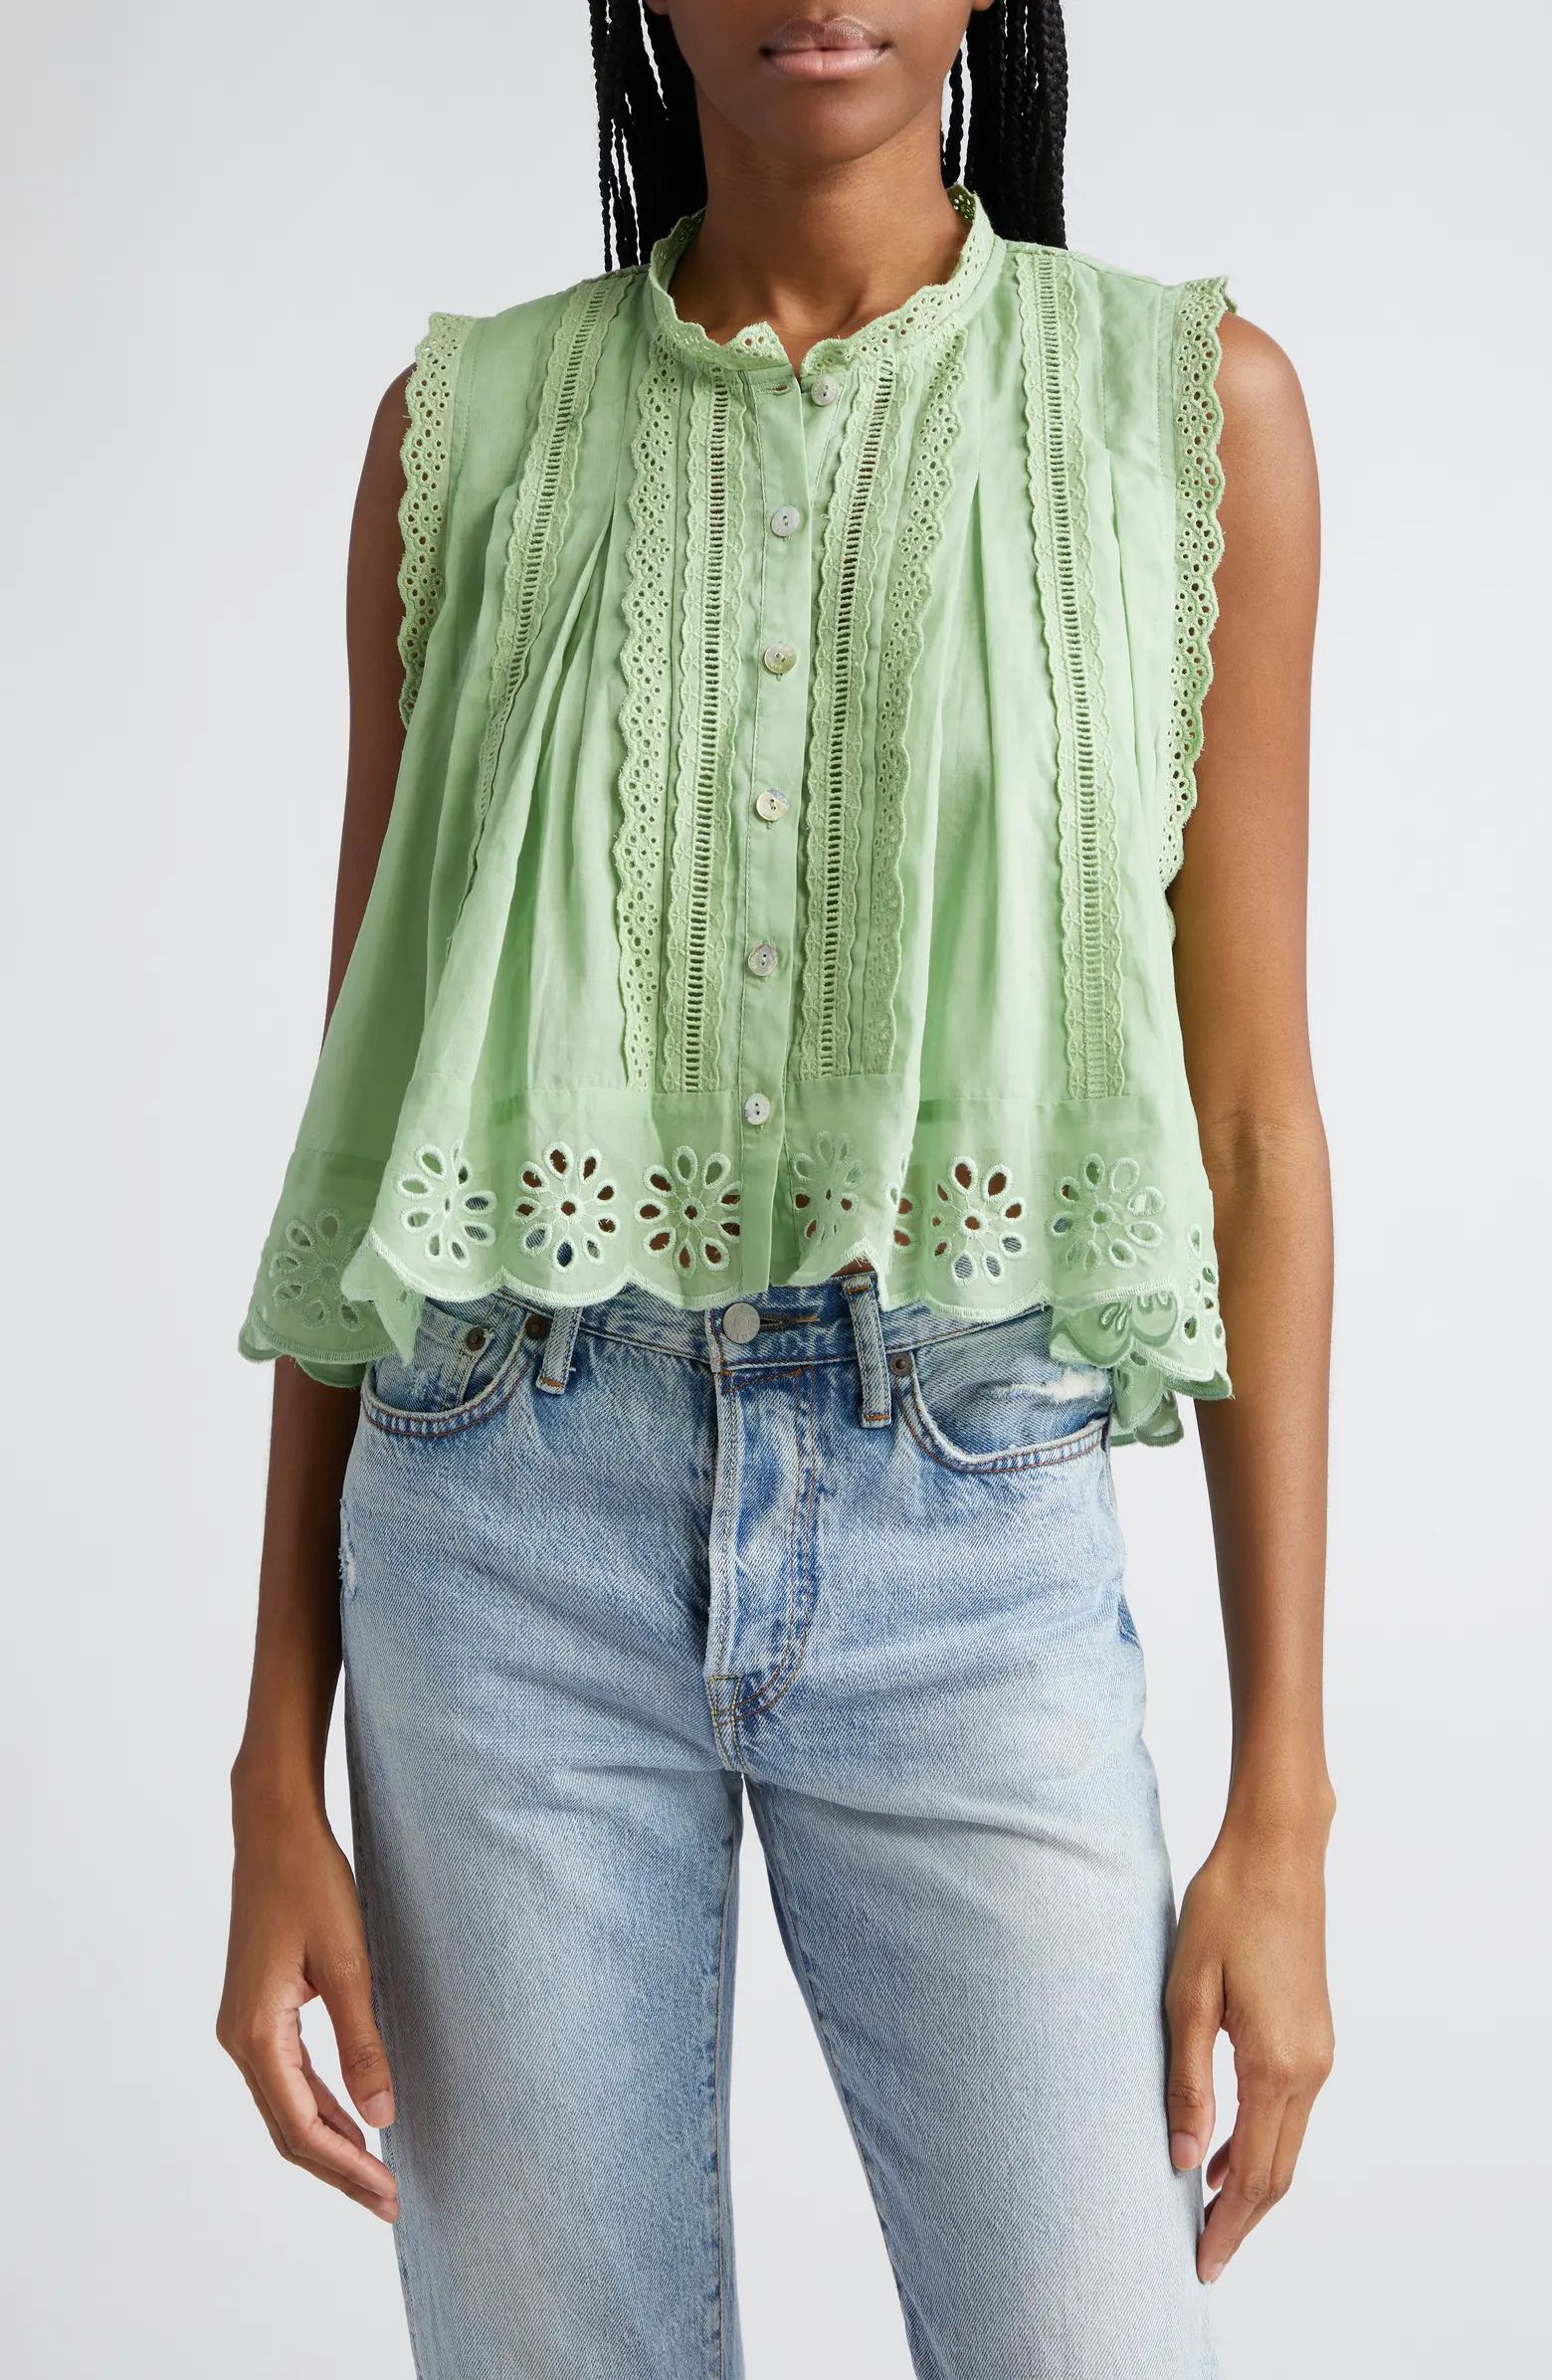 FARM Rio Eyelet Accent Sleeveless High-Low Cotton Top | Nordstrom | Nordstrom